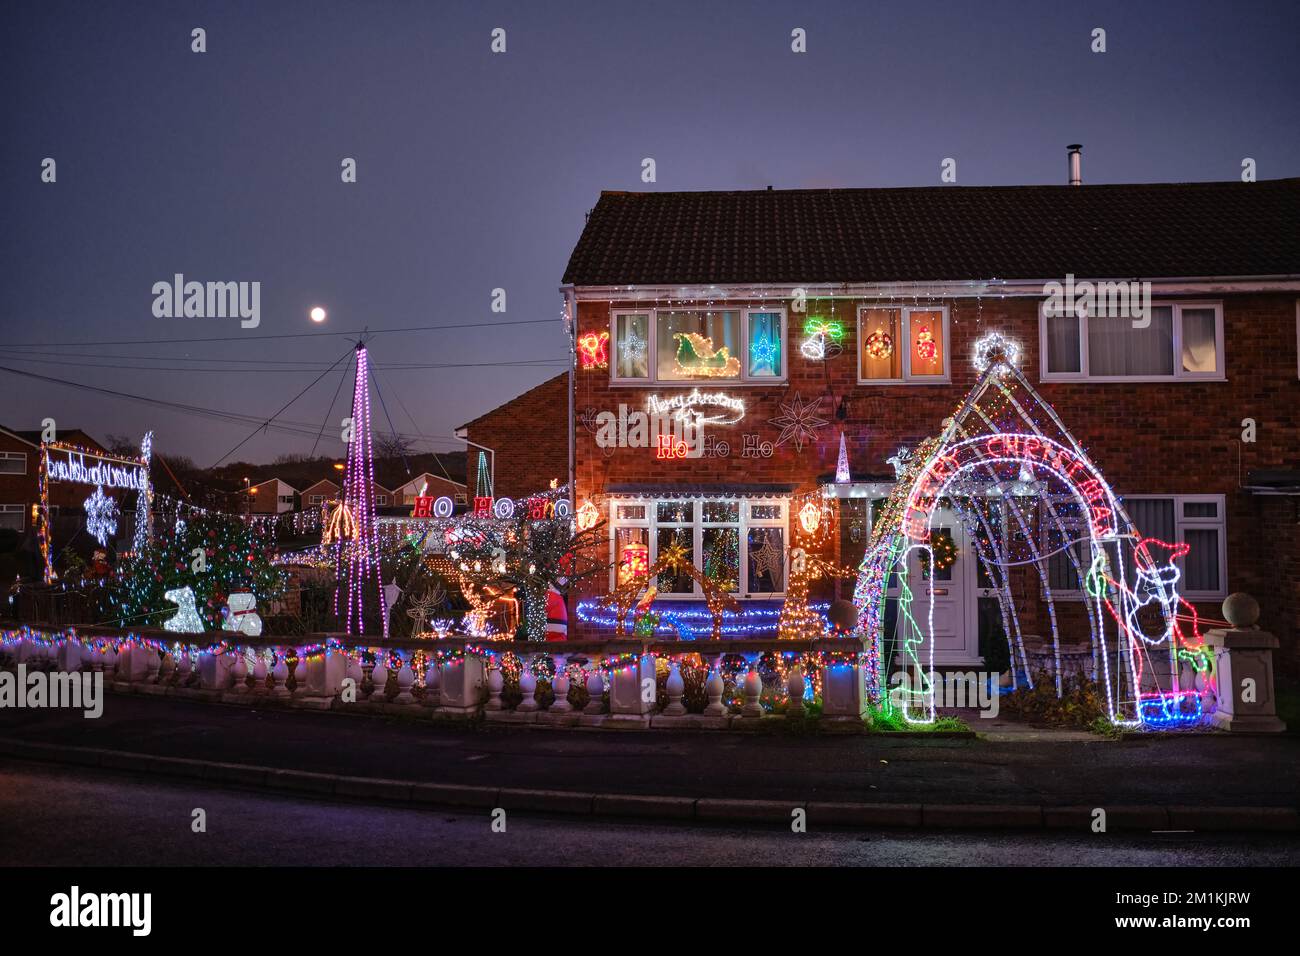 Christmas lights in the front garden of a house in England Stock Photo